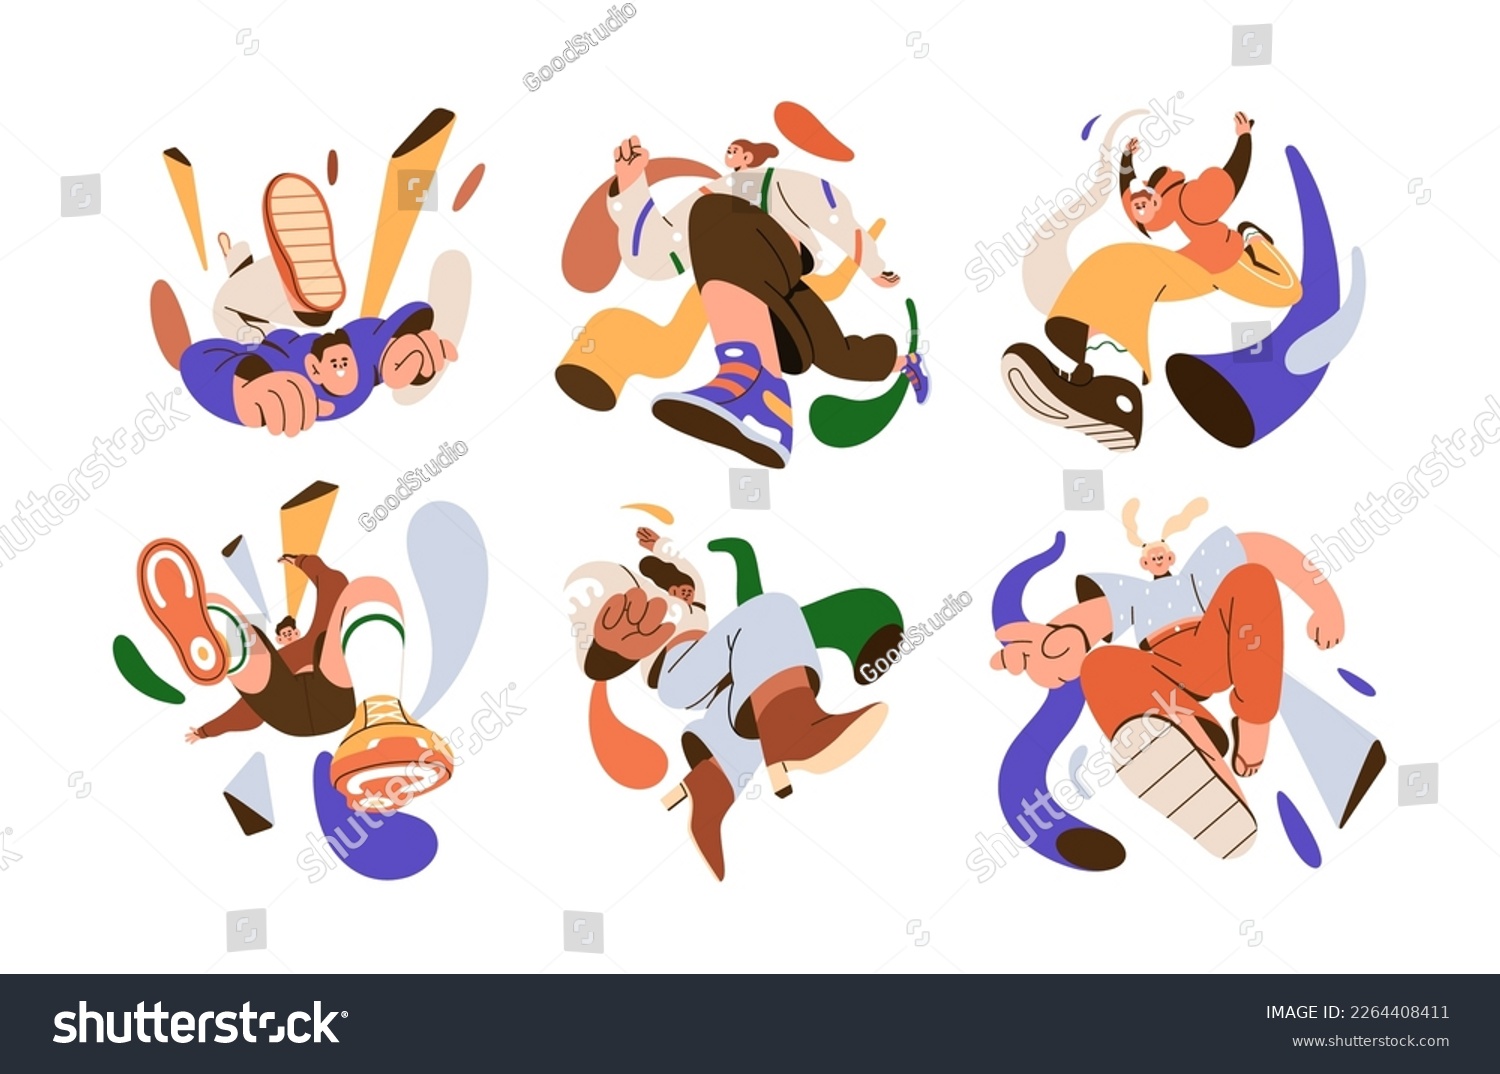 Happy young free people jumping up, flying with fun, joy emotions. Energy, freedom, enthusiasm, new heights, goals, aspirations concept. Flat graphic vector illustrations isolated on white background #2264408411